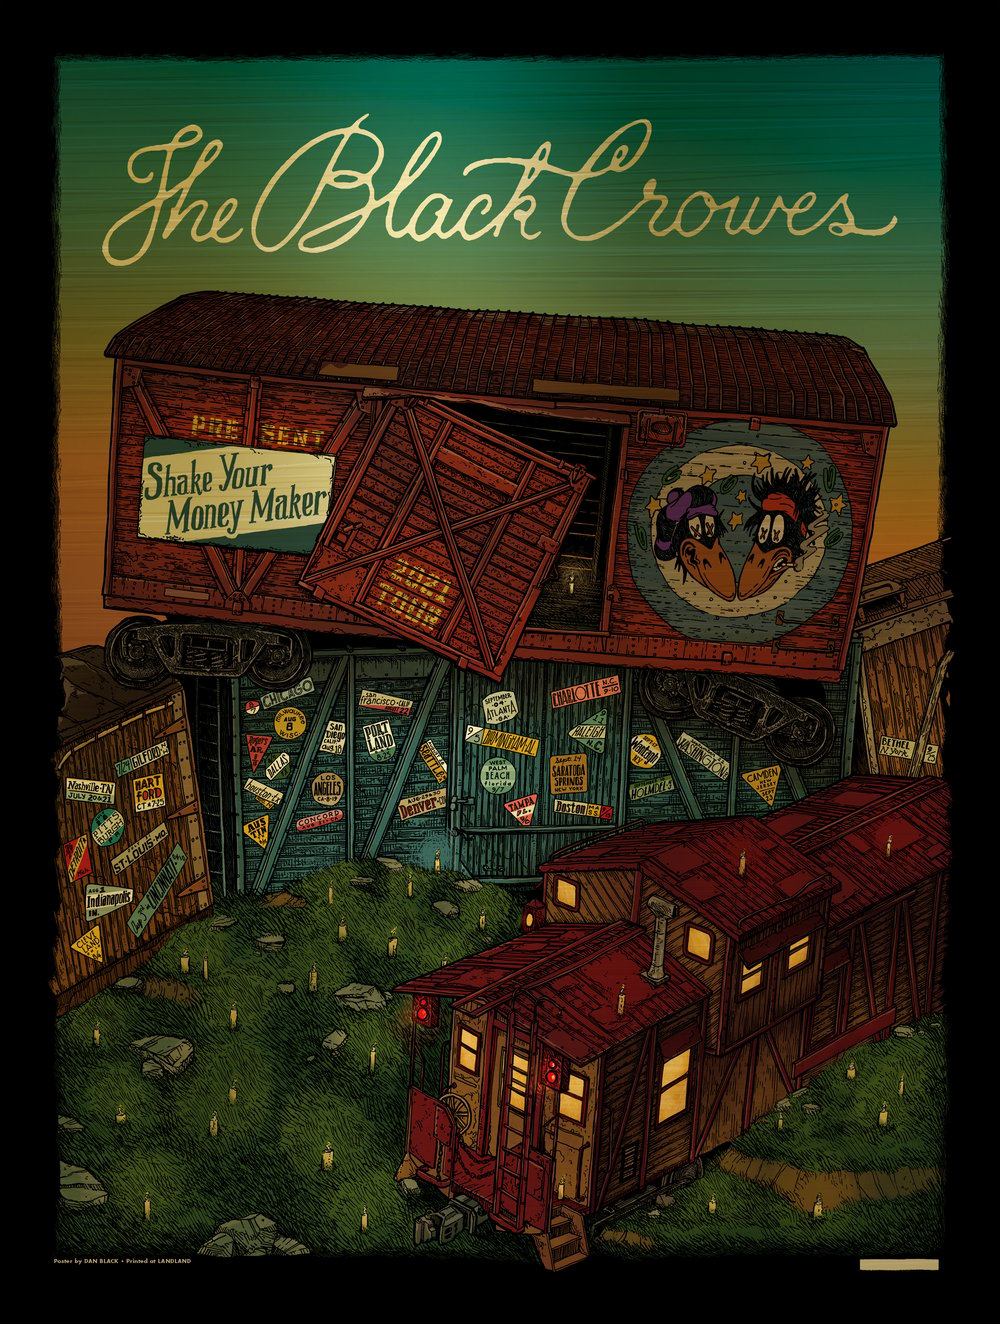 The Black Crowes ("Shake Your Money Maker" 2021 Tour) • L.E. Official Poster (18" x 24")